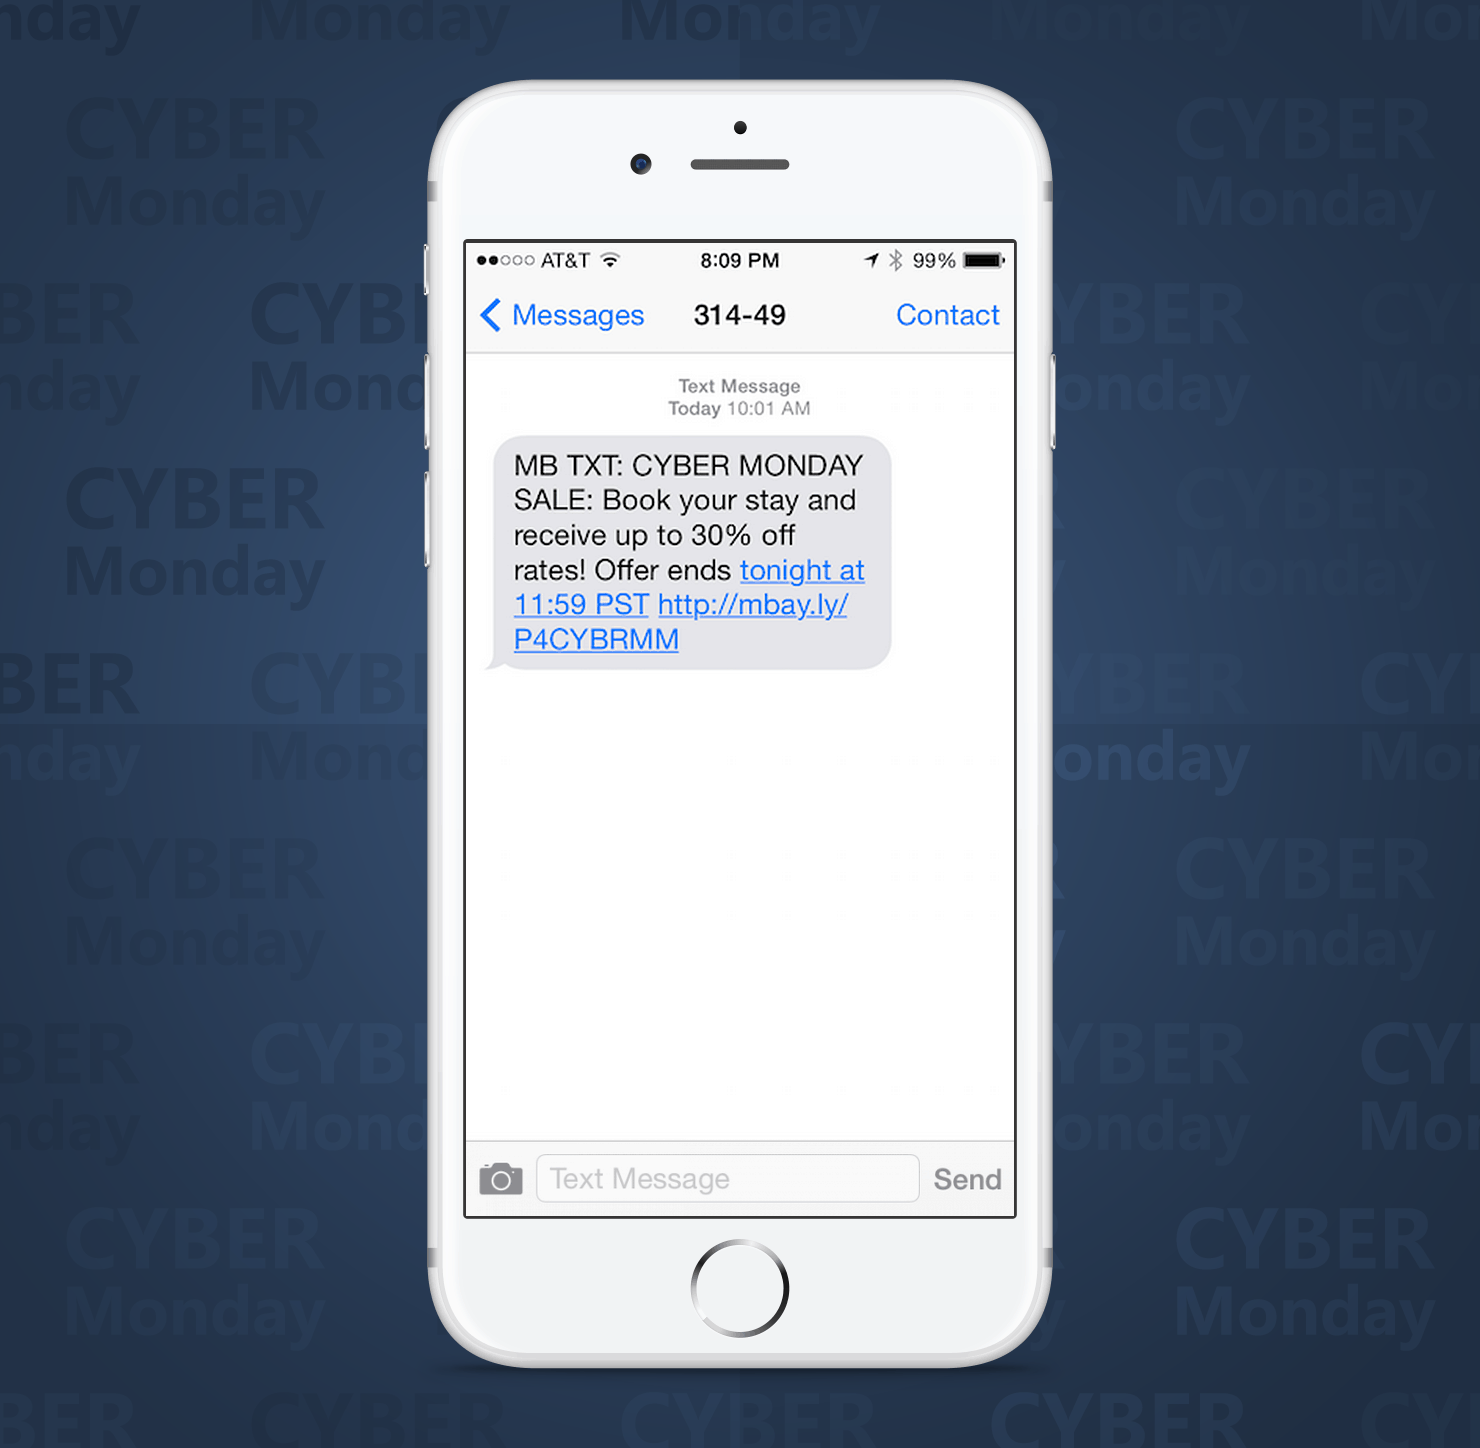 SMS Coupon Example Sent on Cyber Monday From Major League Baseball to Customers